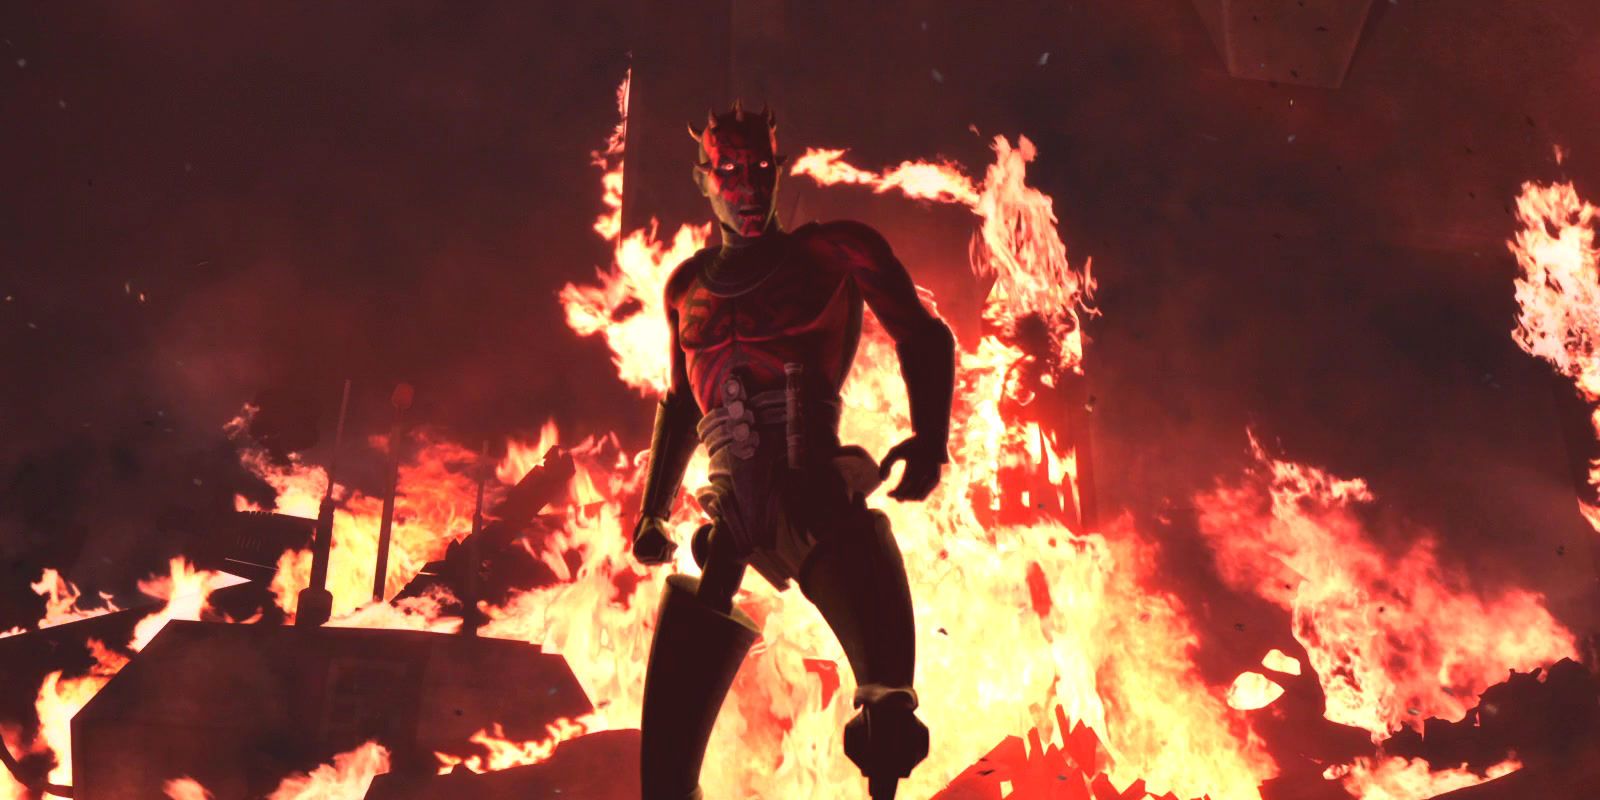 Darth Maul in front of flames